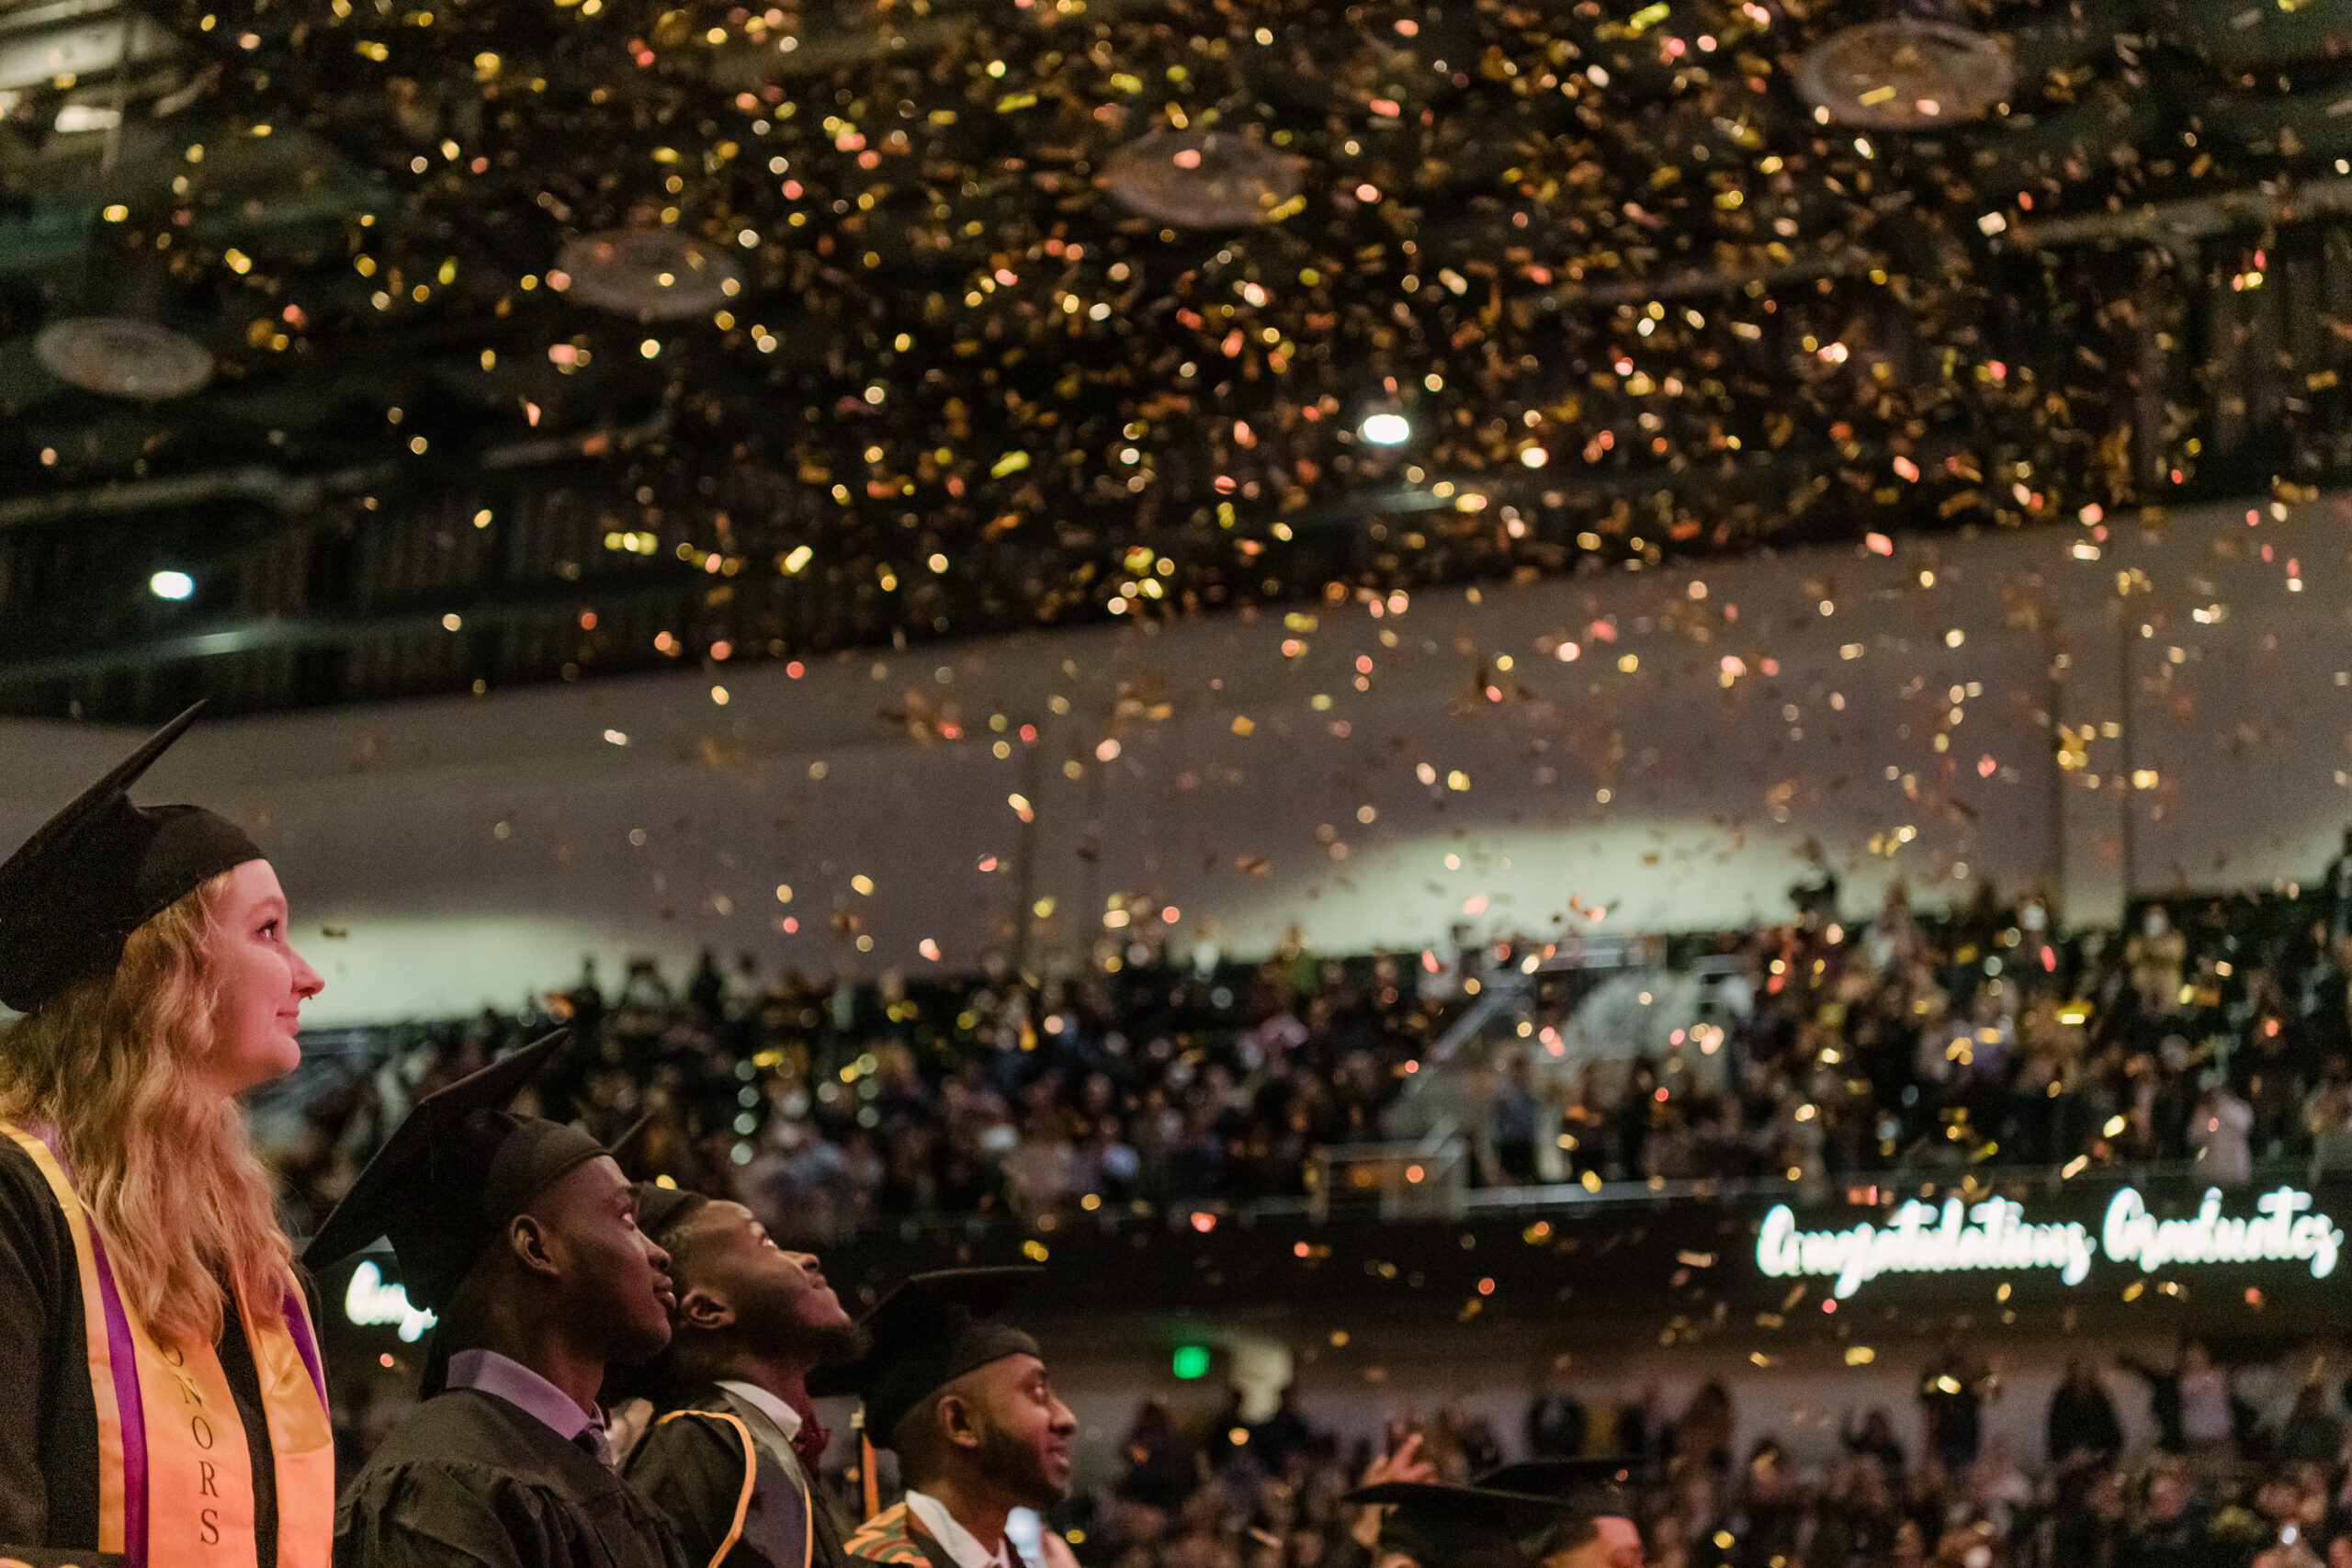 students in commencement regalia look up as glitter falls